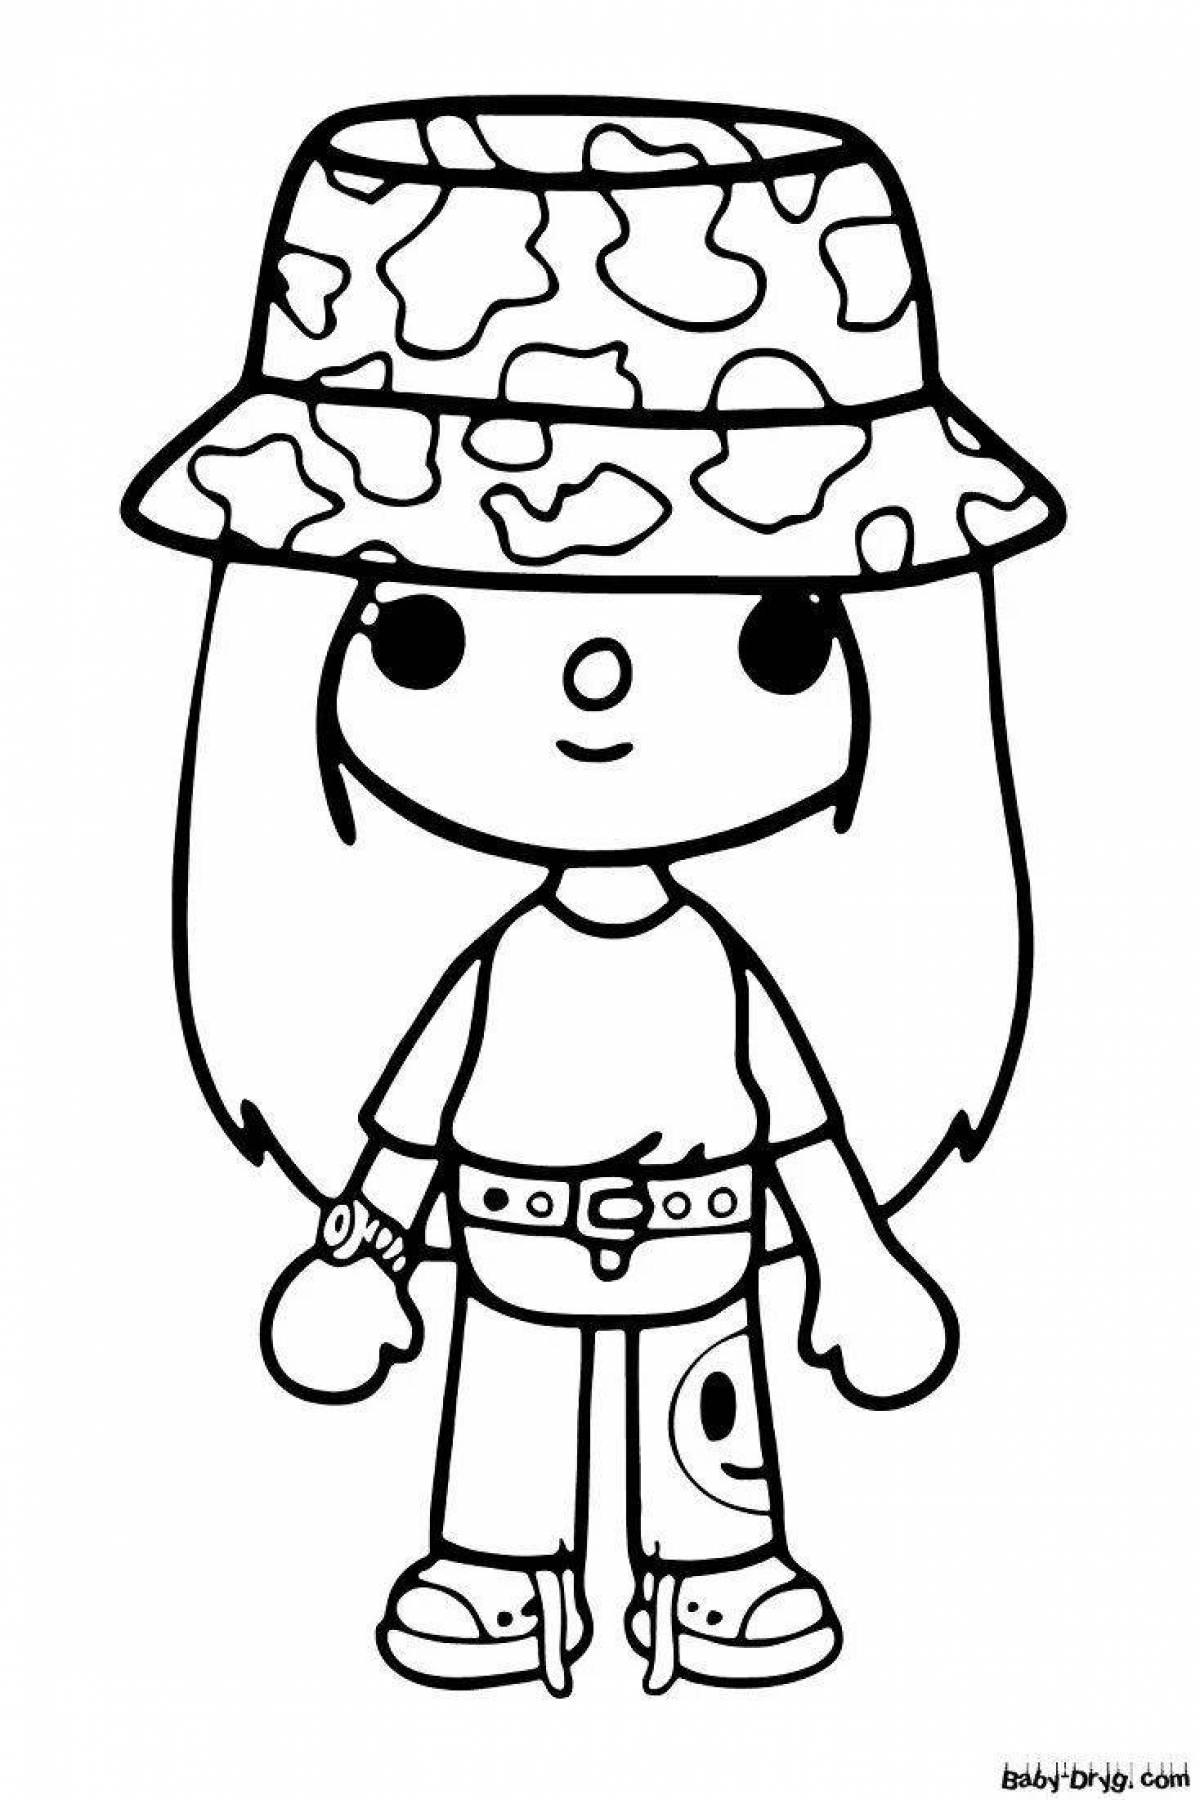 Togo boko's cute coloring page